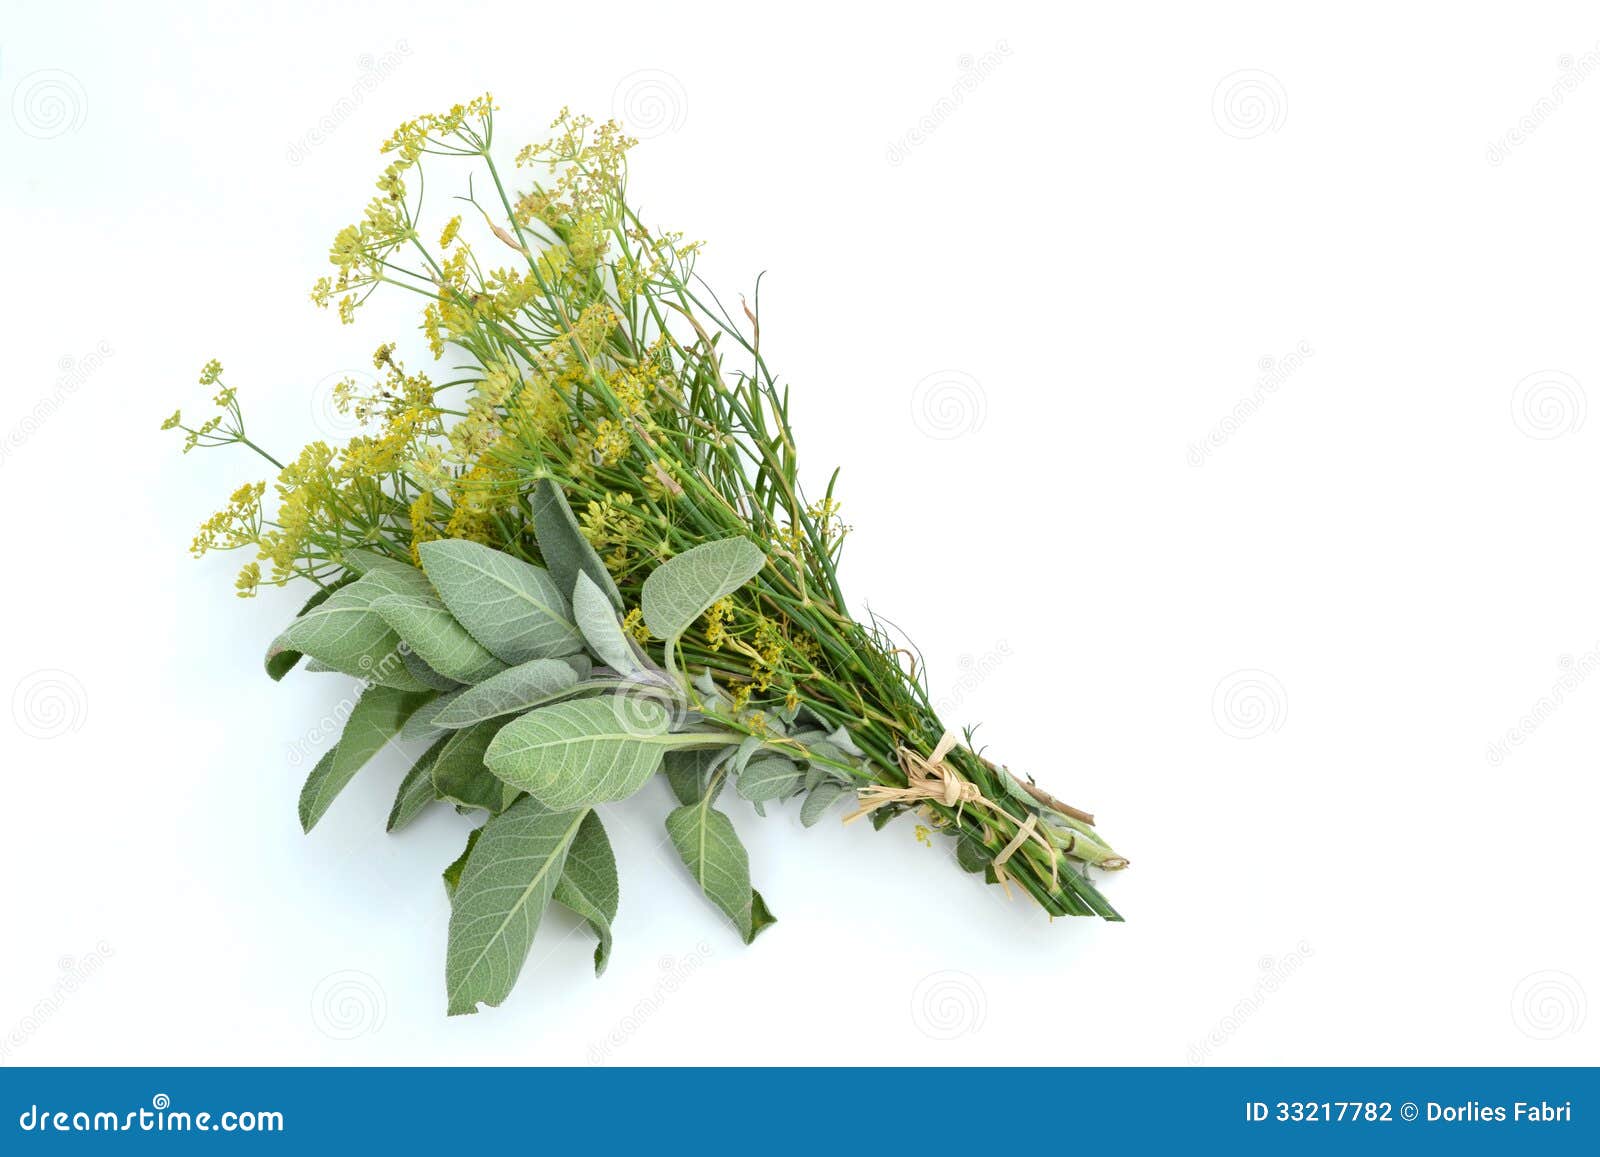 Sage with fennel stock photo. Image of yellow, sage, white - 33217782